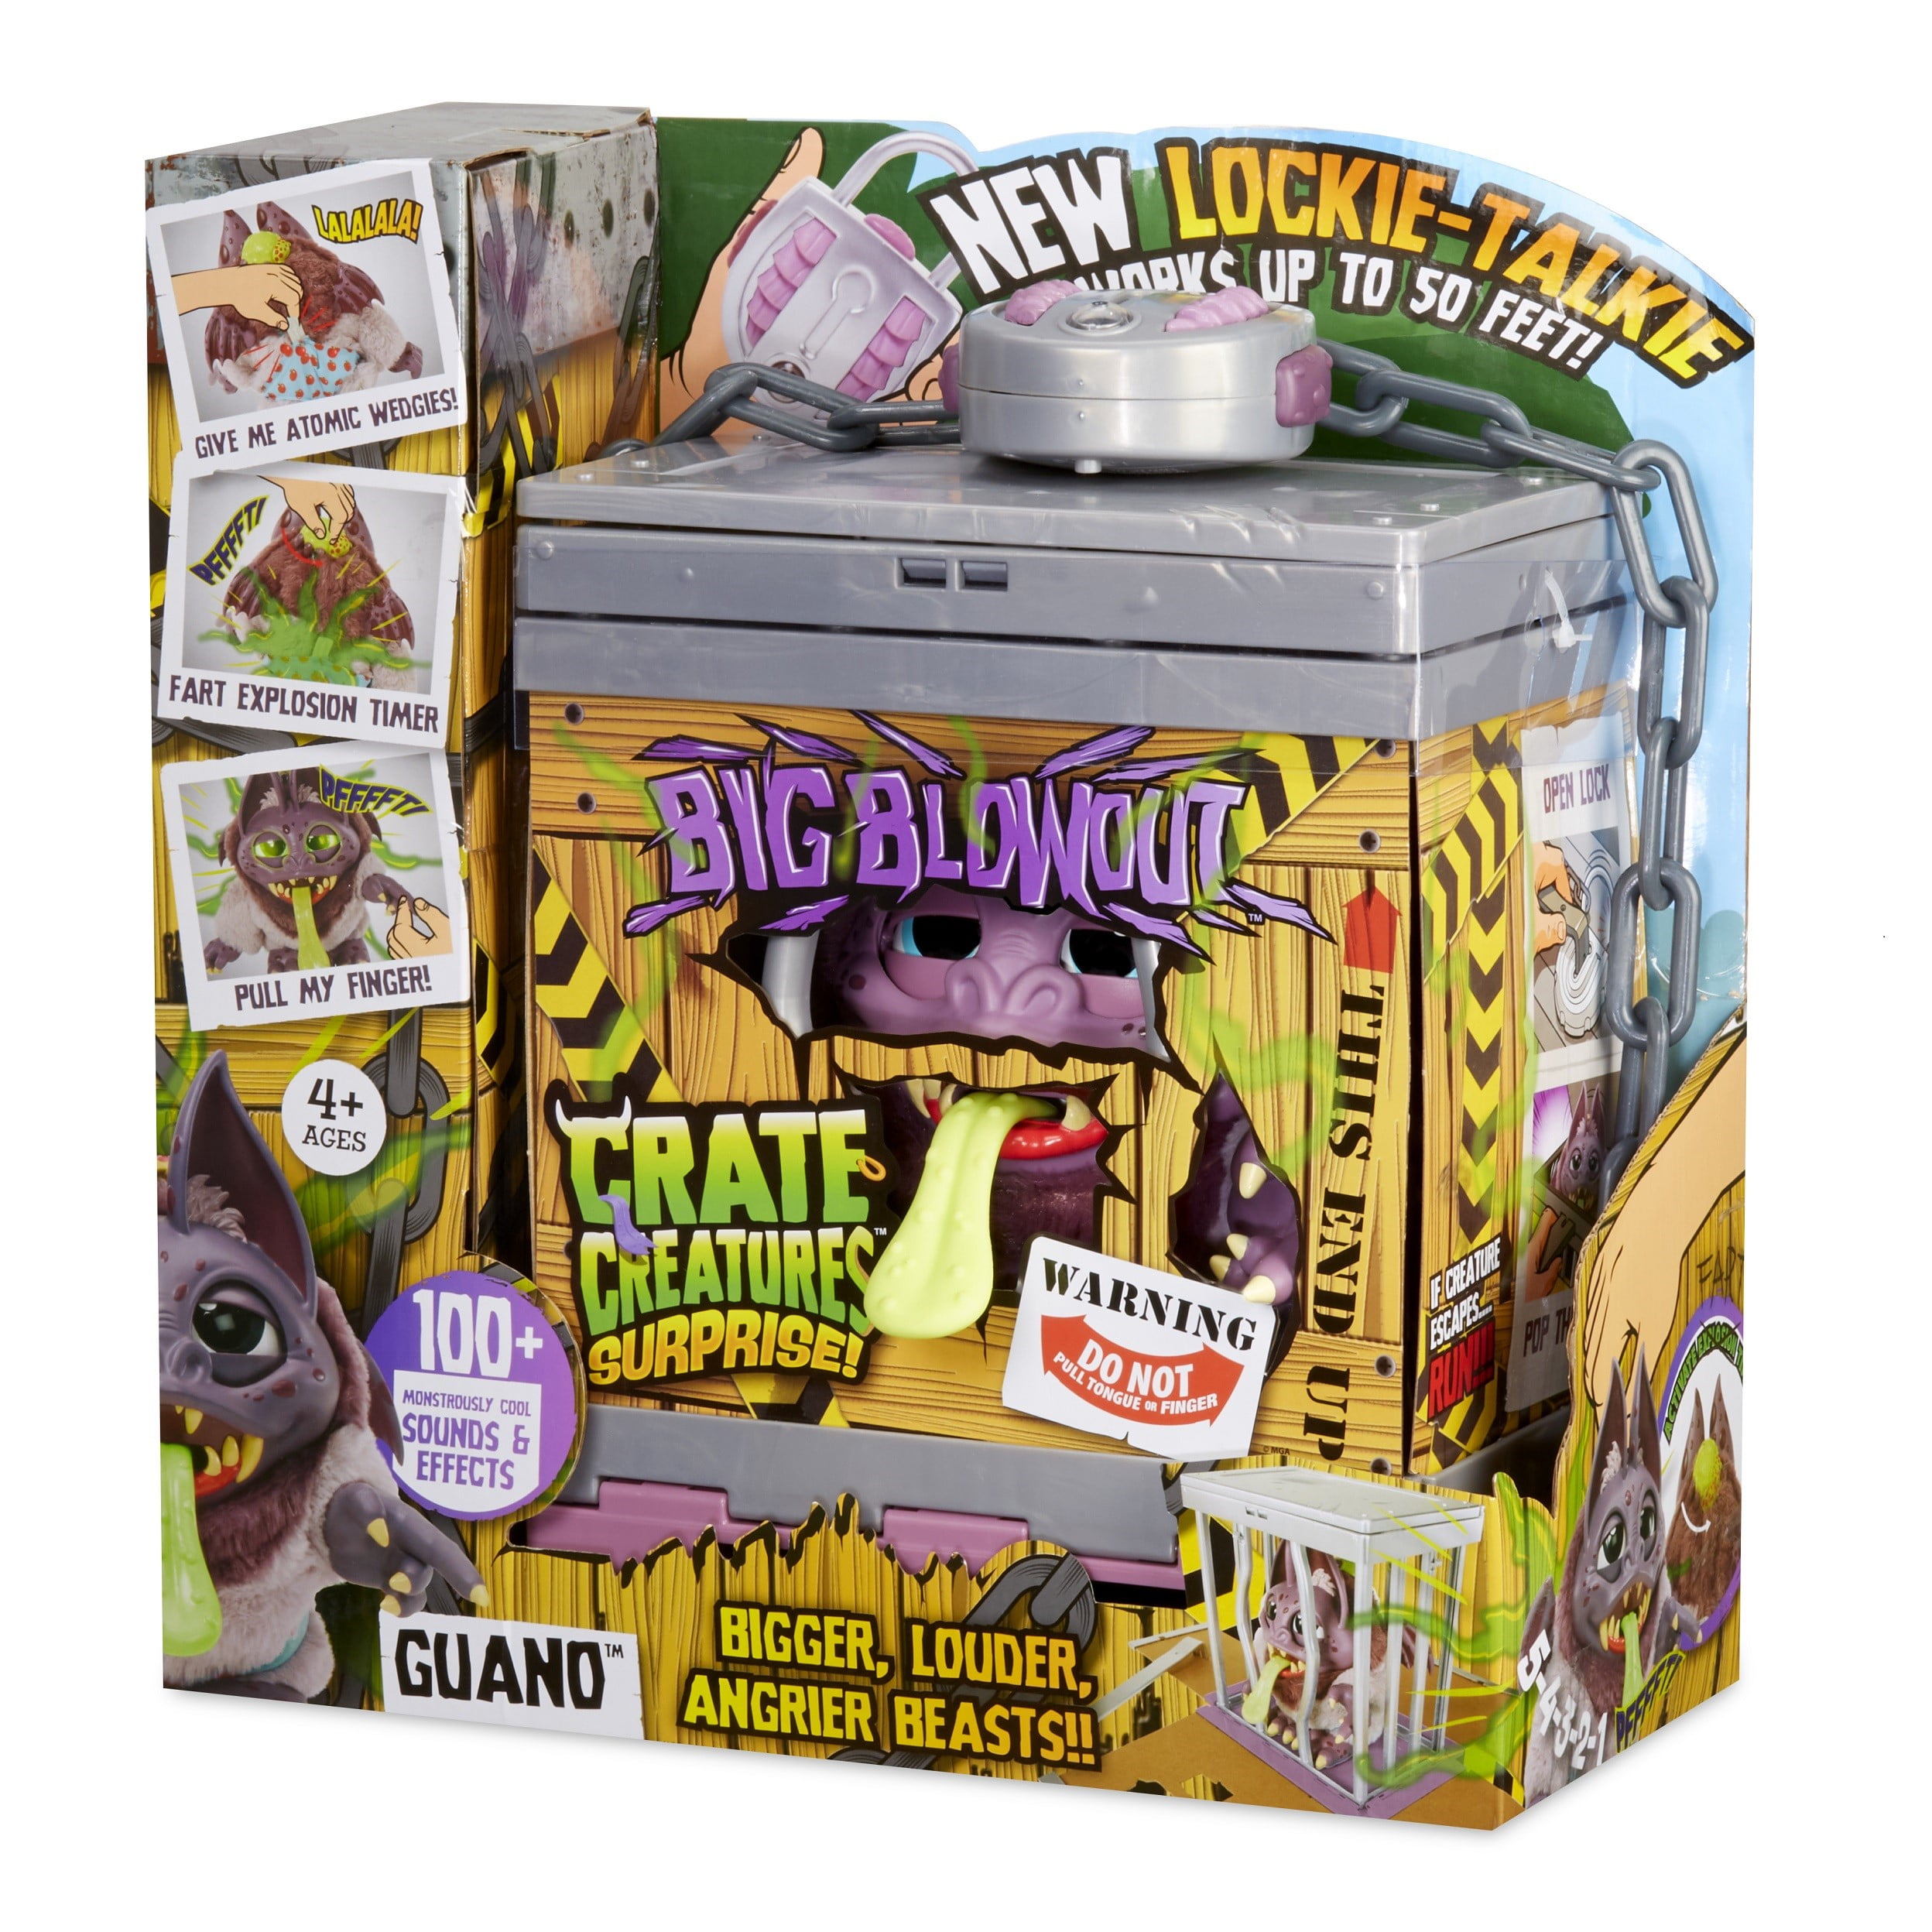 crate creatures guano